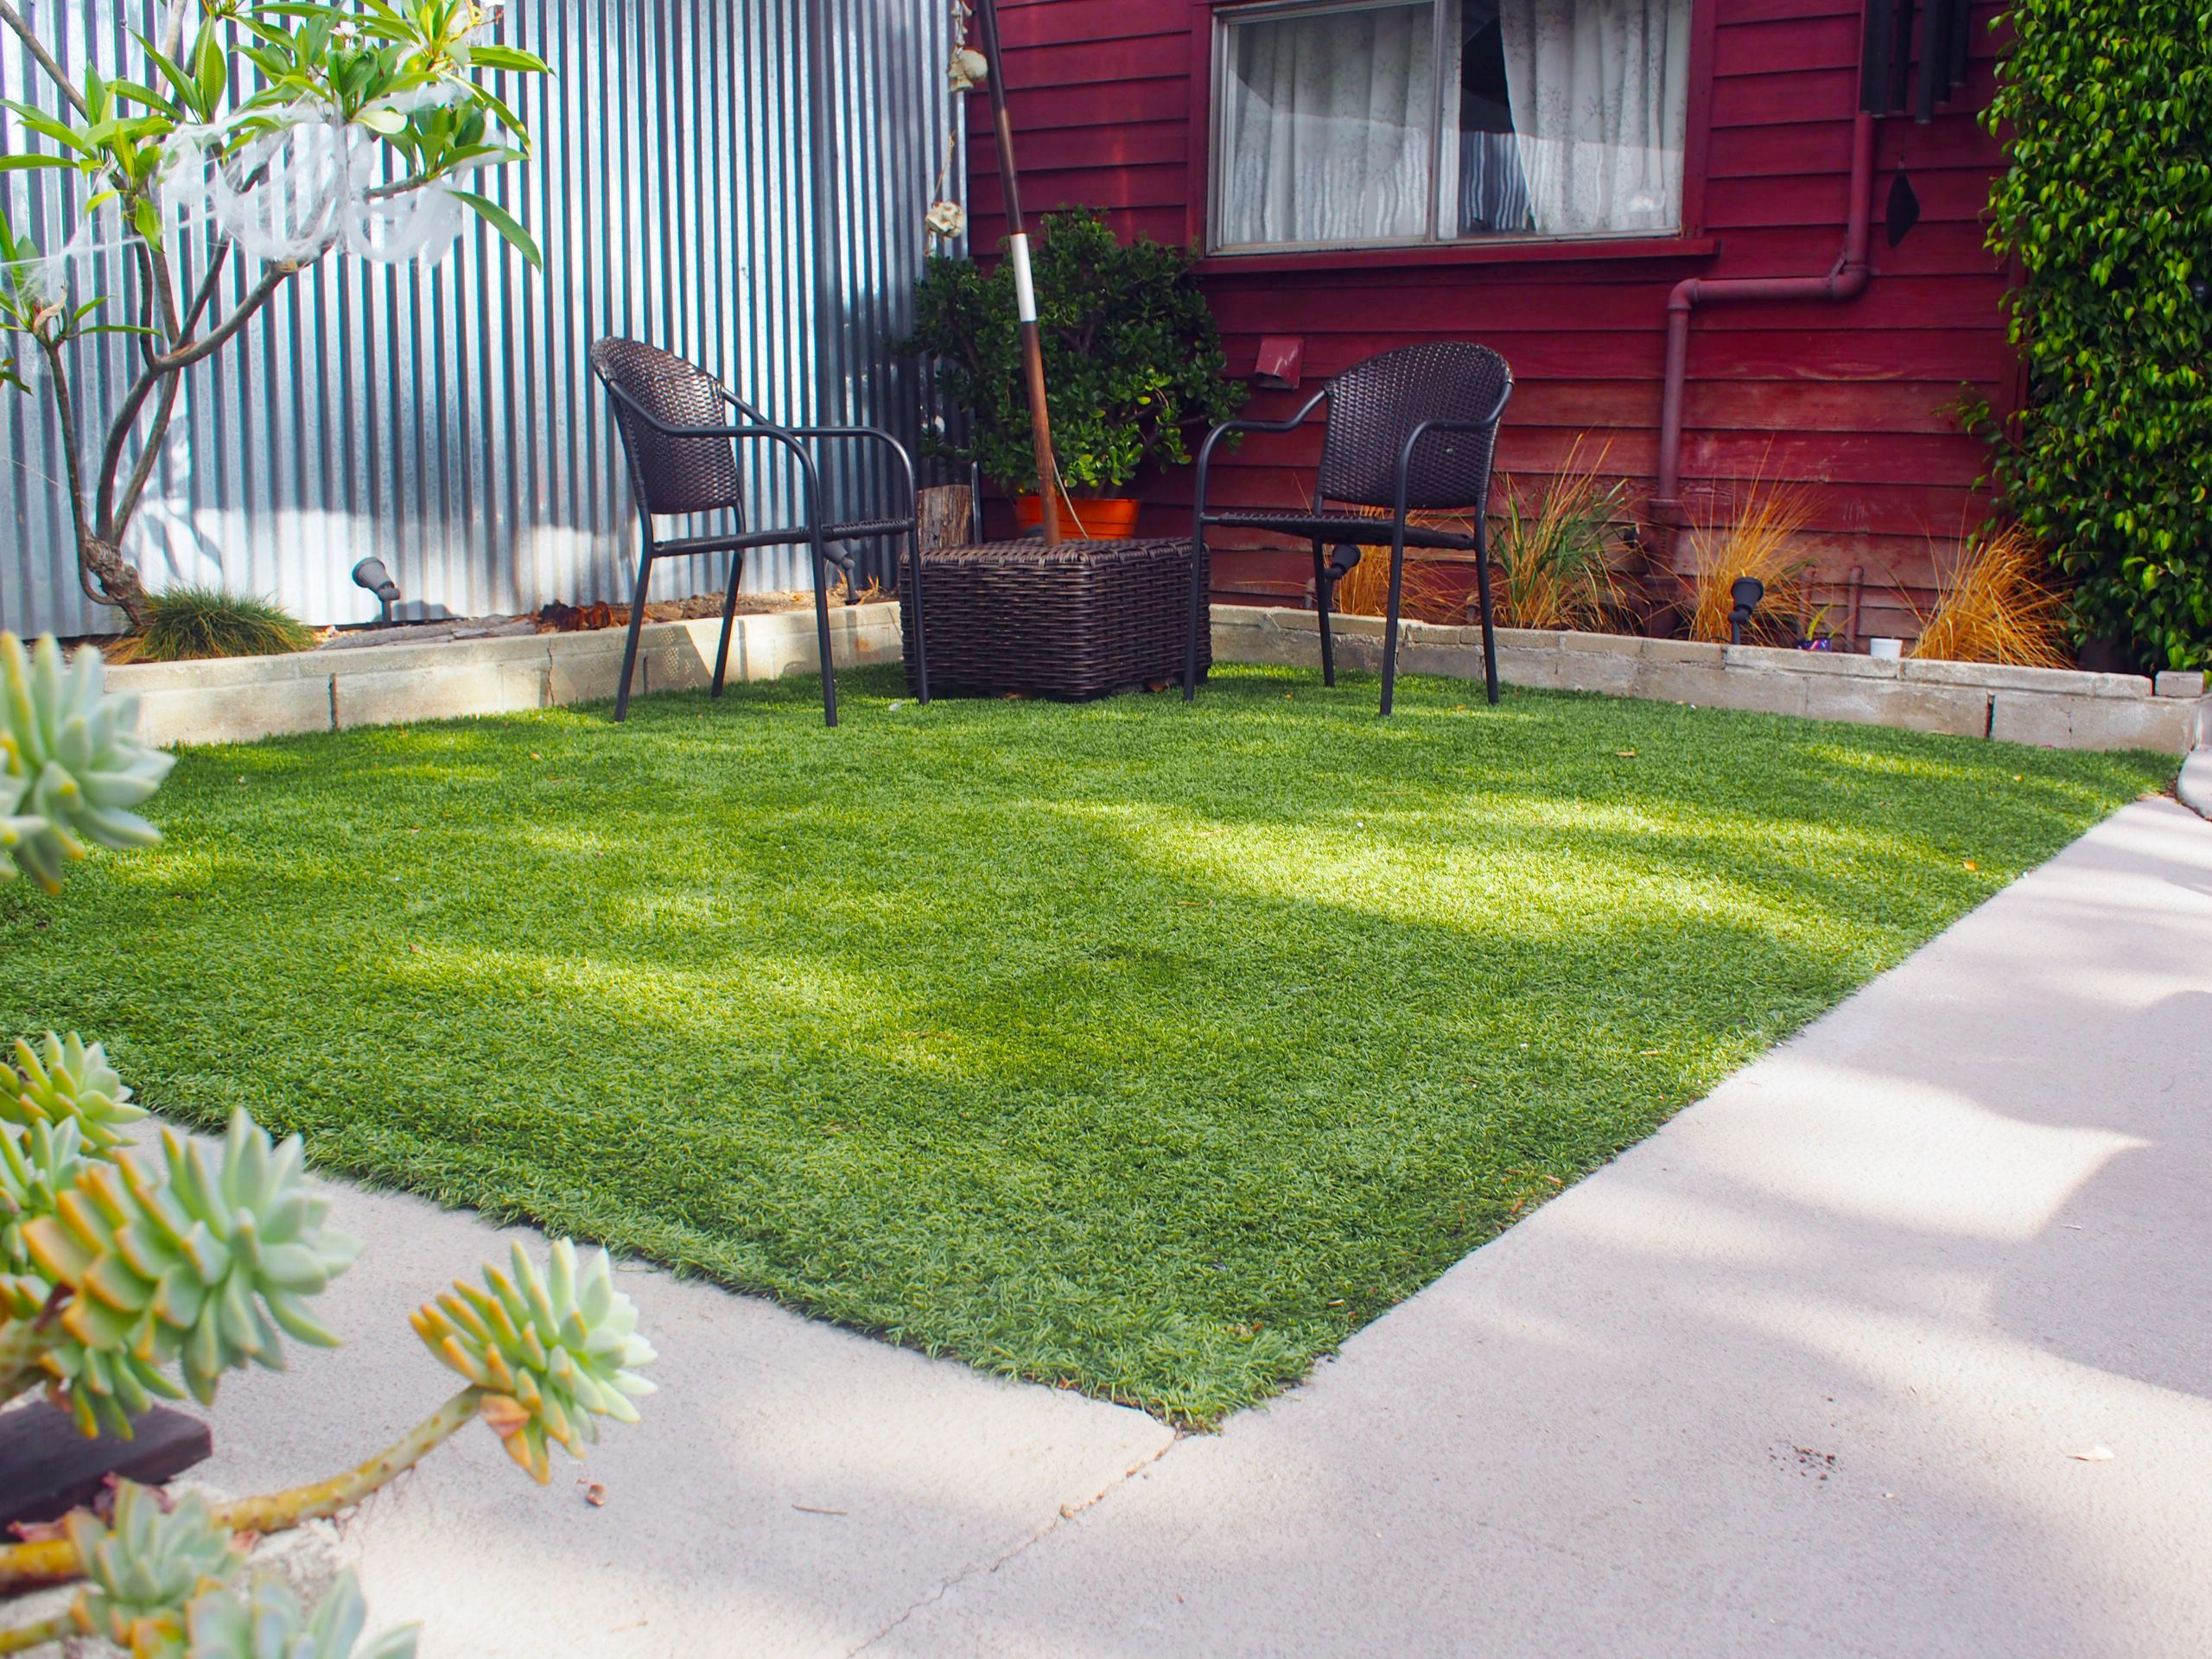 How To Lay Artificial Grass Turf - How To Install Fake Grass On Patio